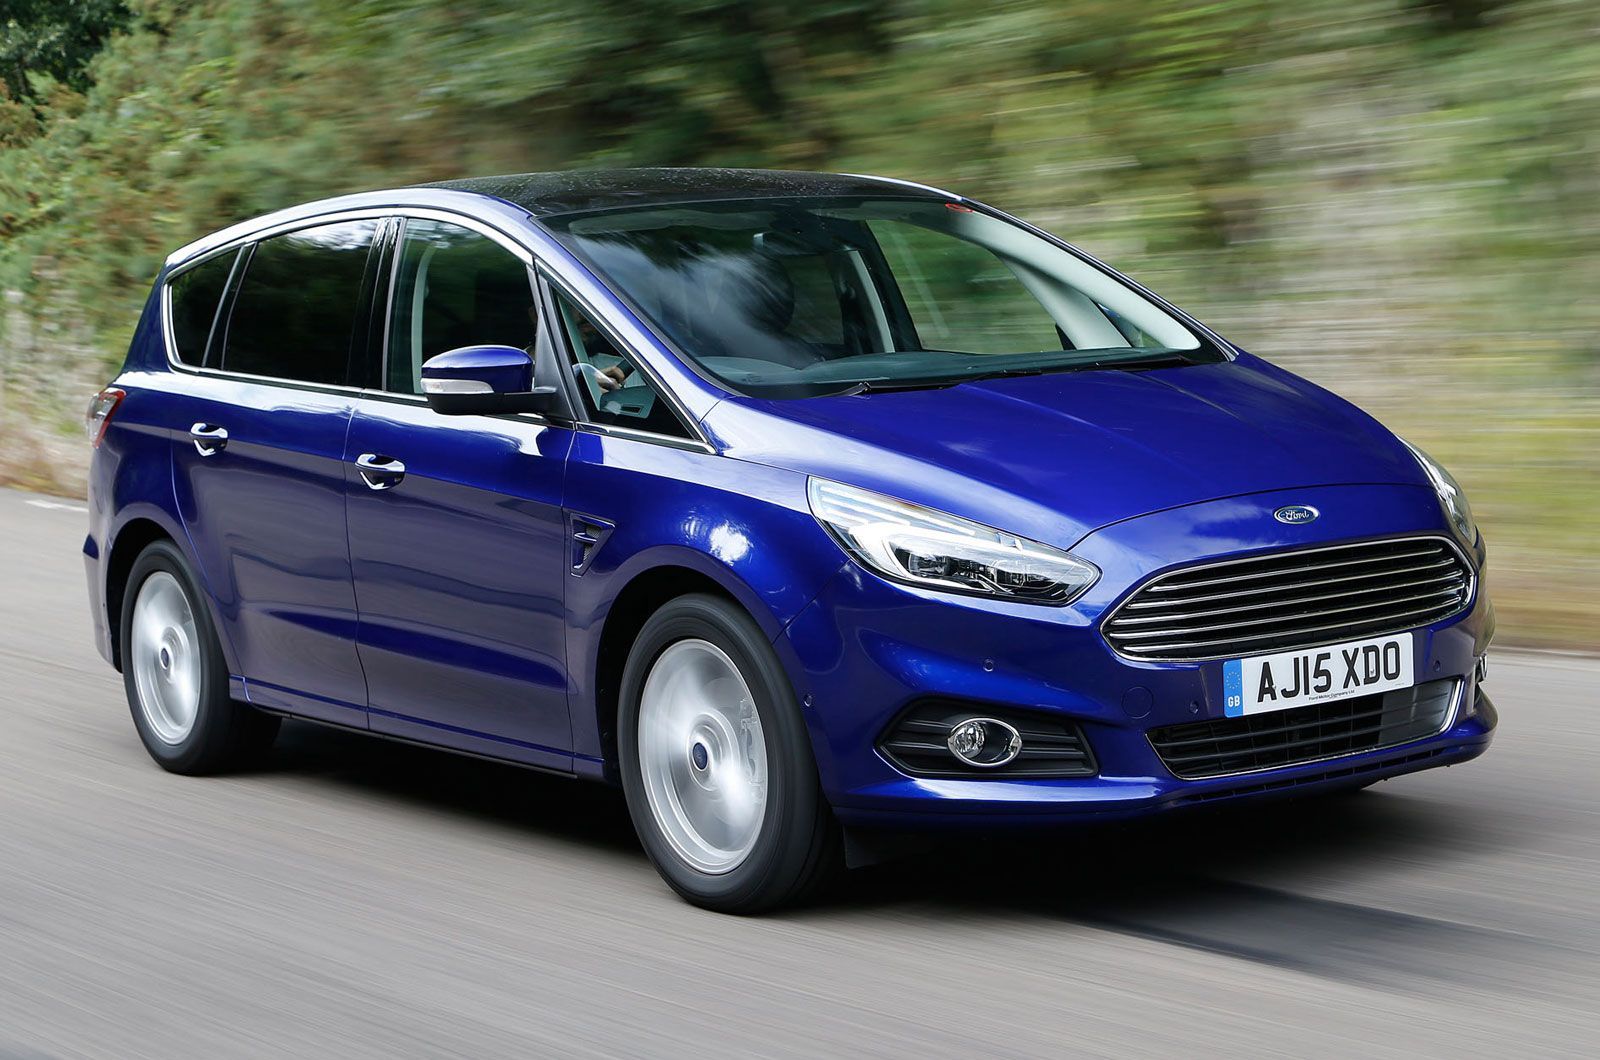 https://www.autocar.co.uk/sites/autocar.co.uk/files/ford-smax-2015-rt-1.jpg